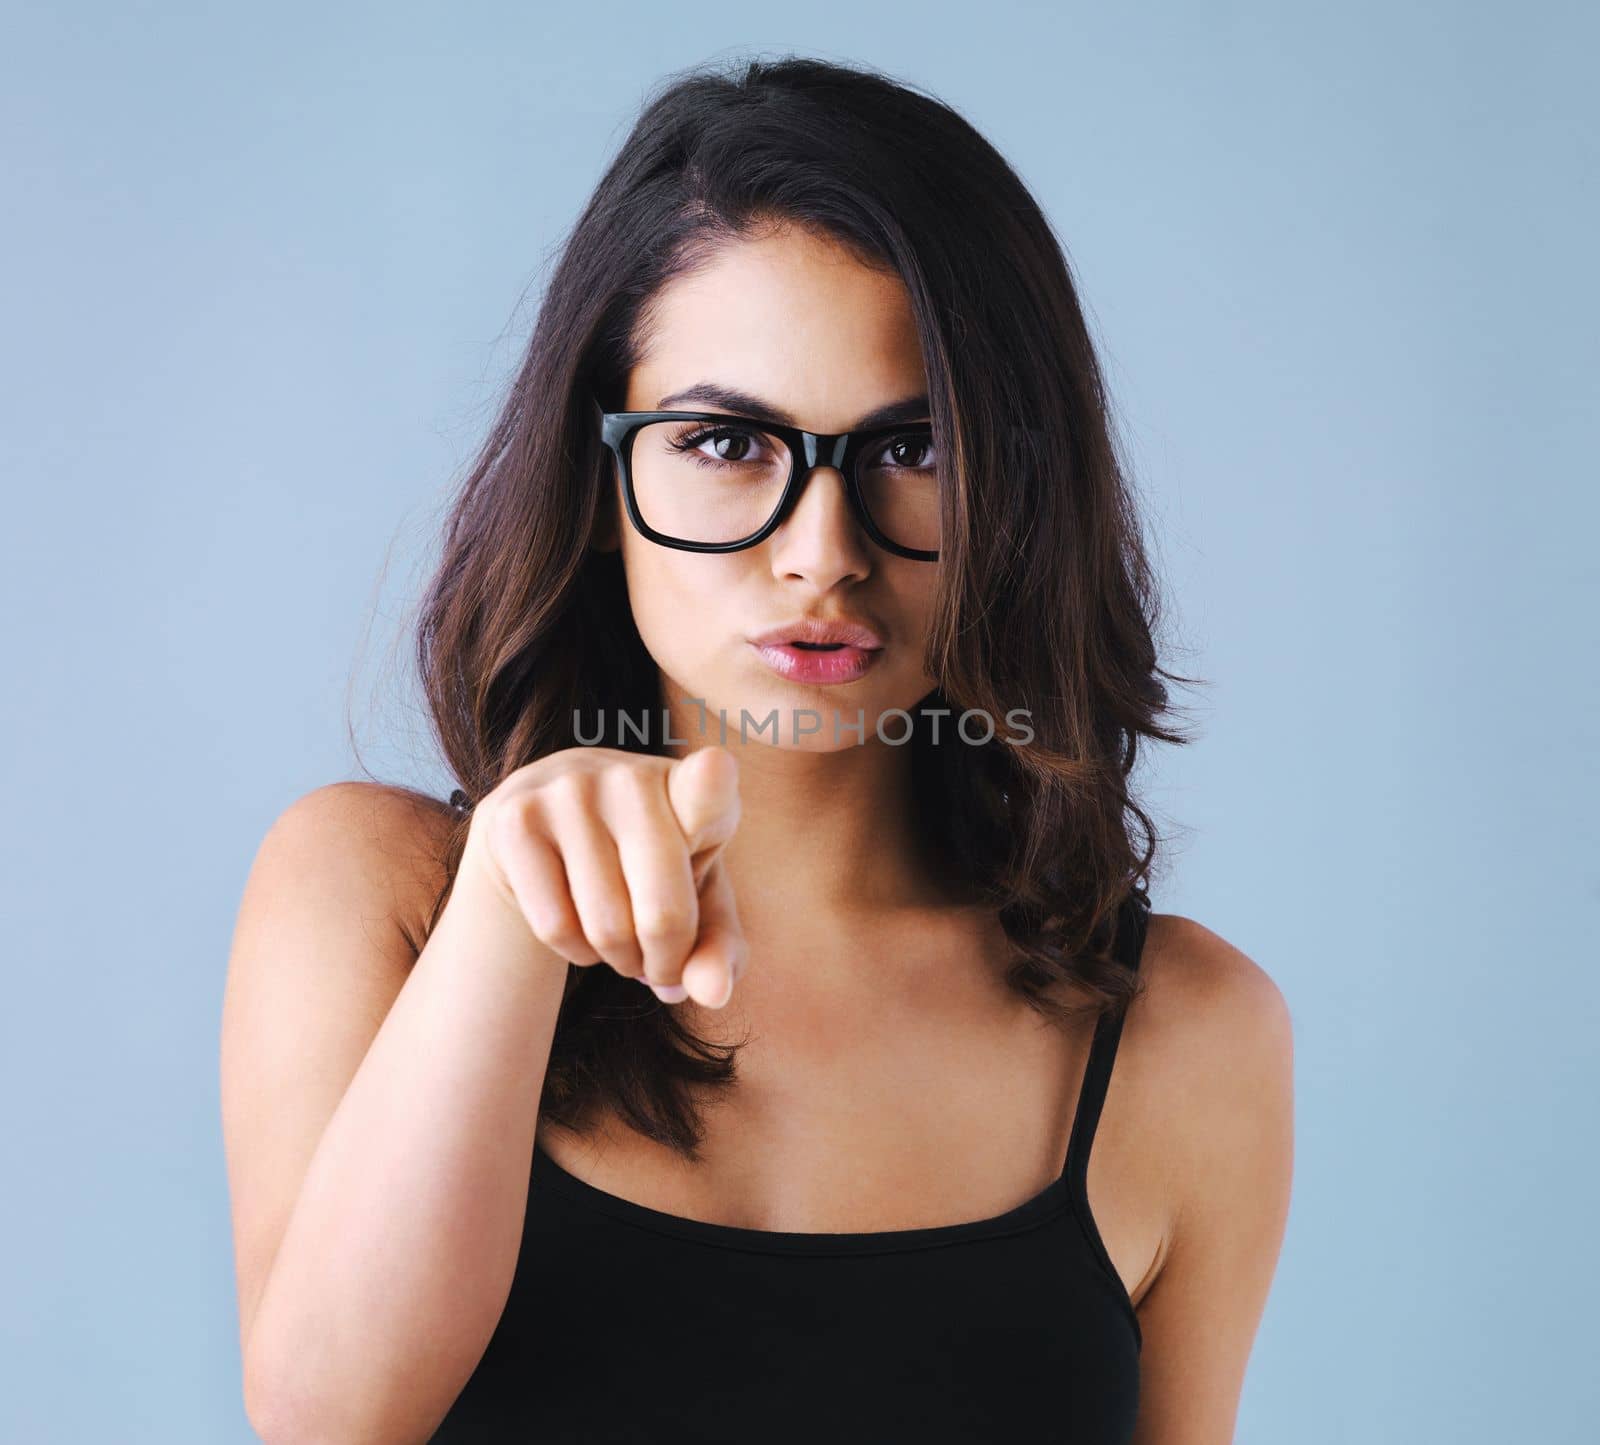 Is this your doing. Studio shot of an attractive young woman pointing and looking unhappy against a gray background